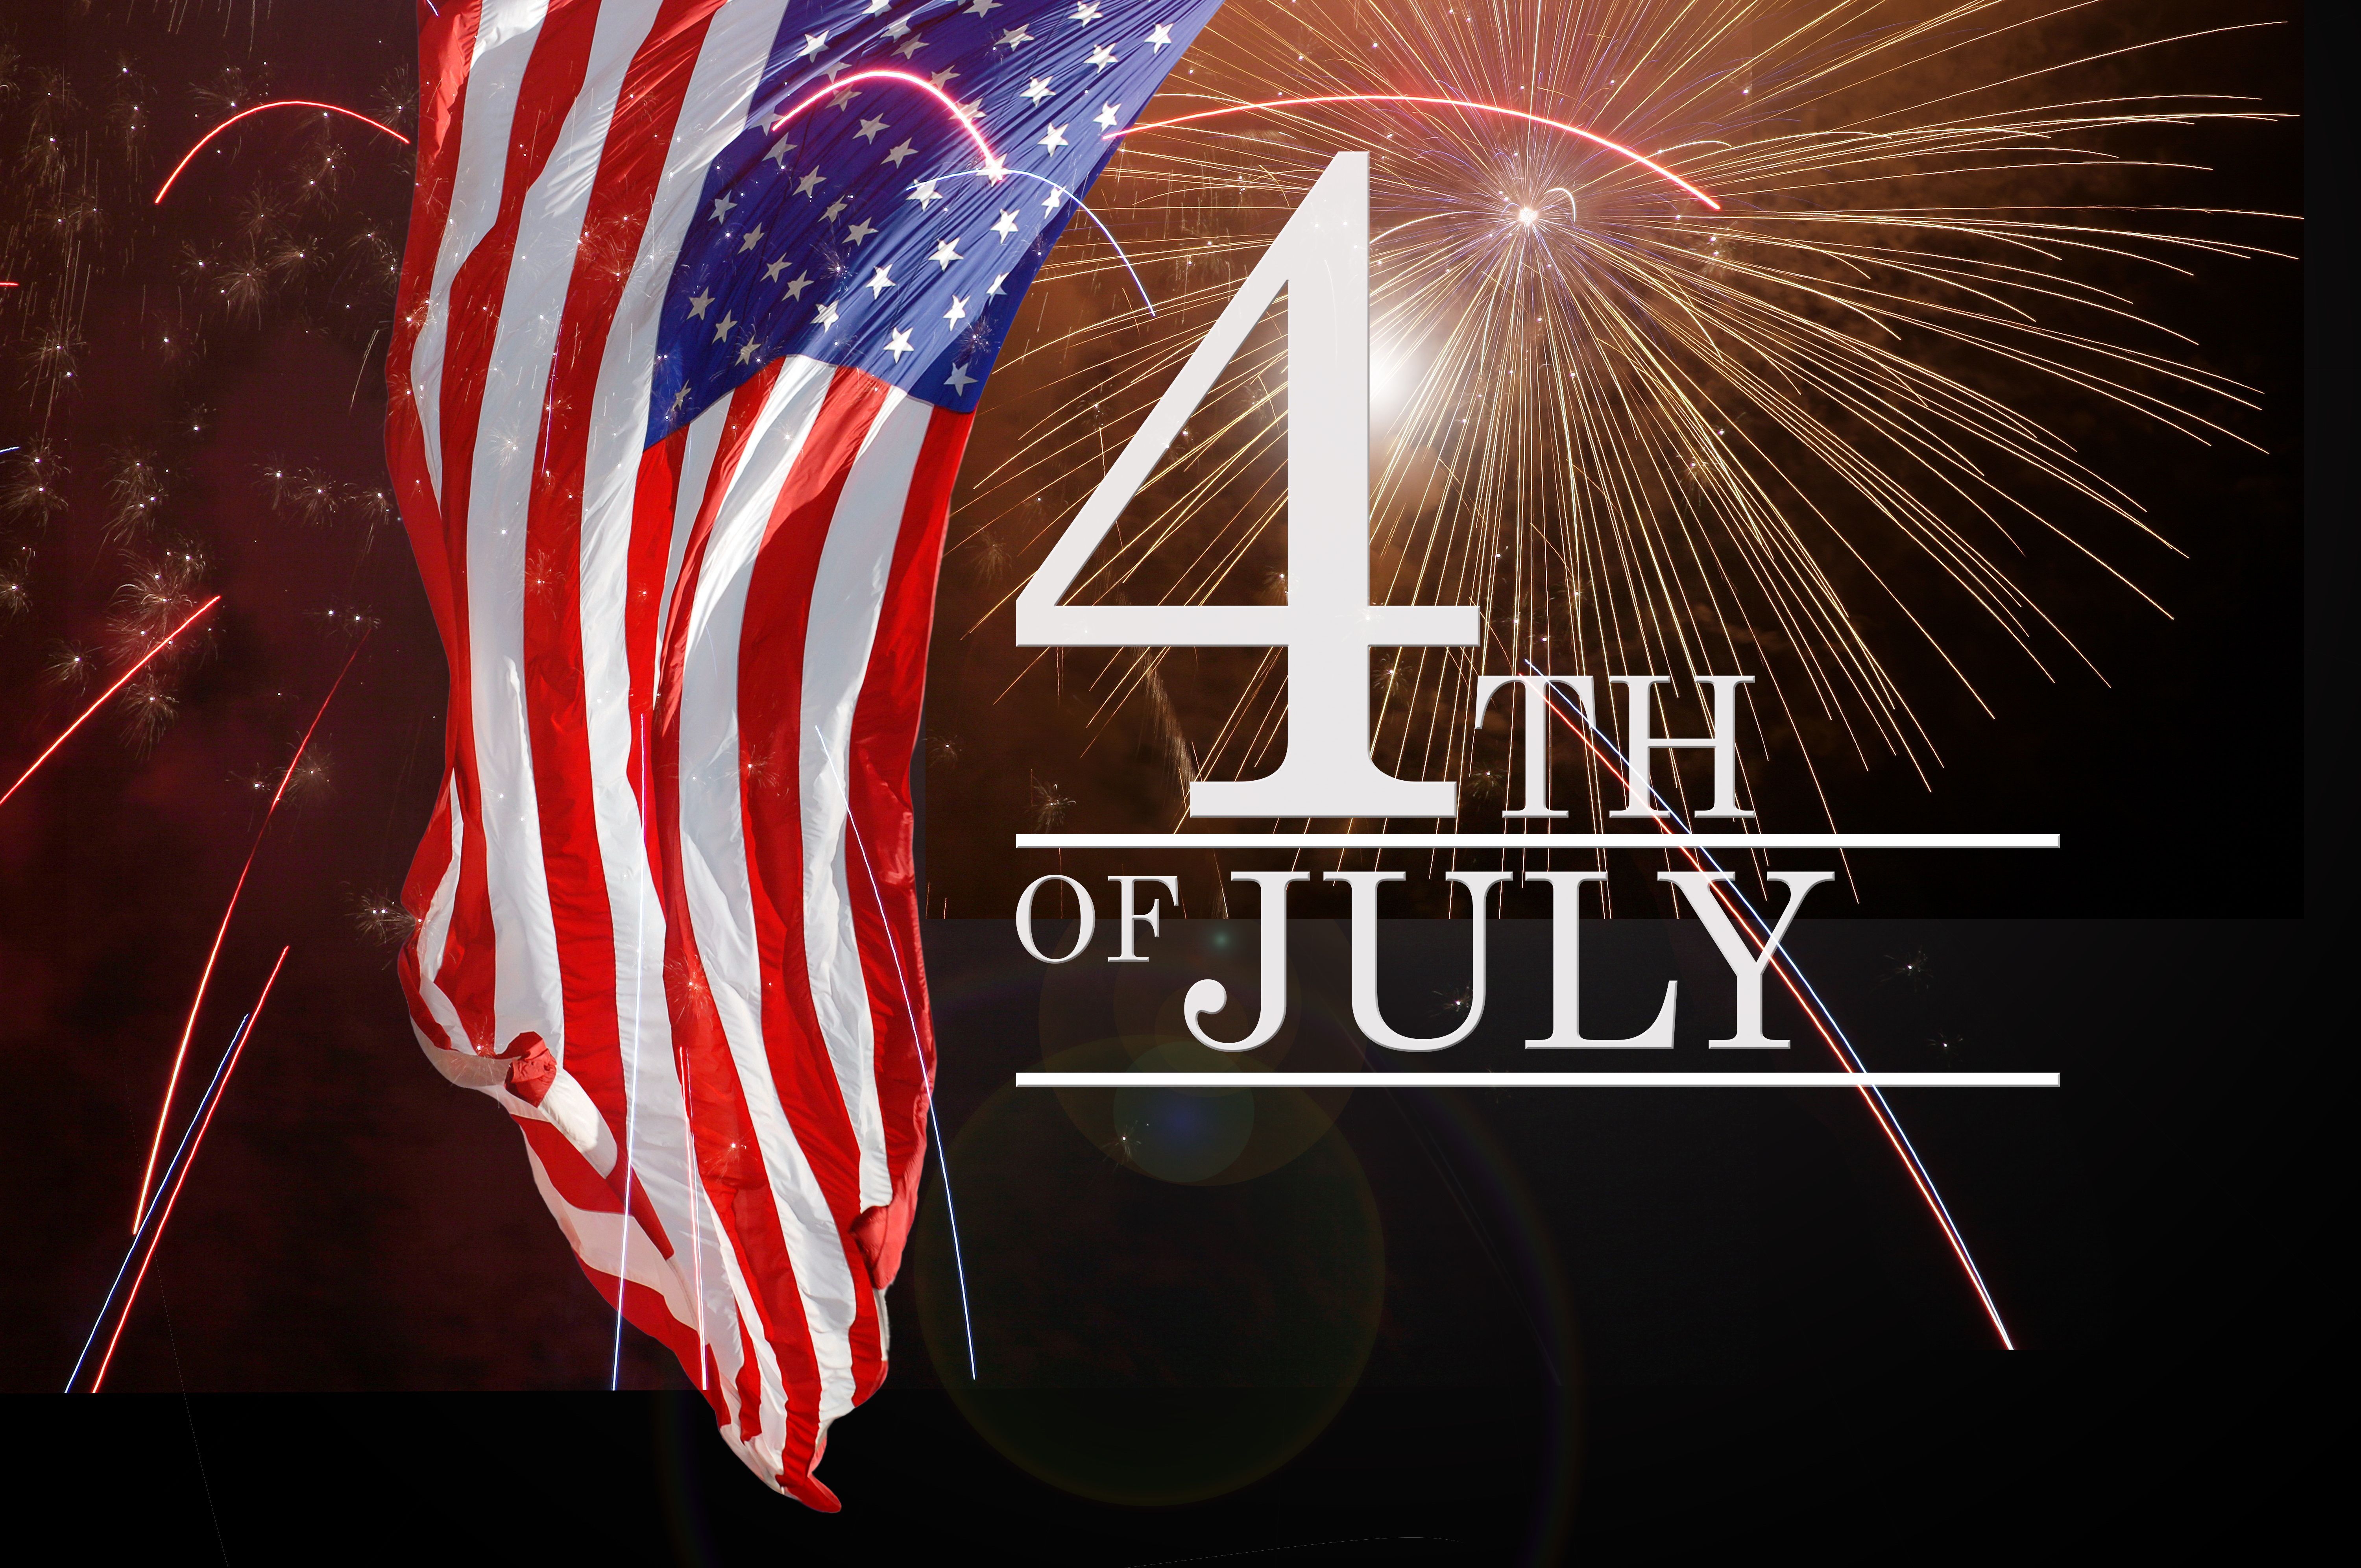 The Bank will be closed in observance of the July 4th Holiday